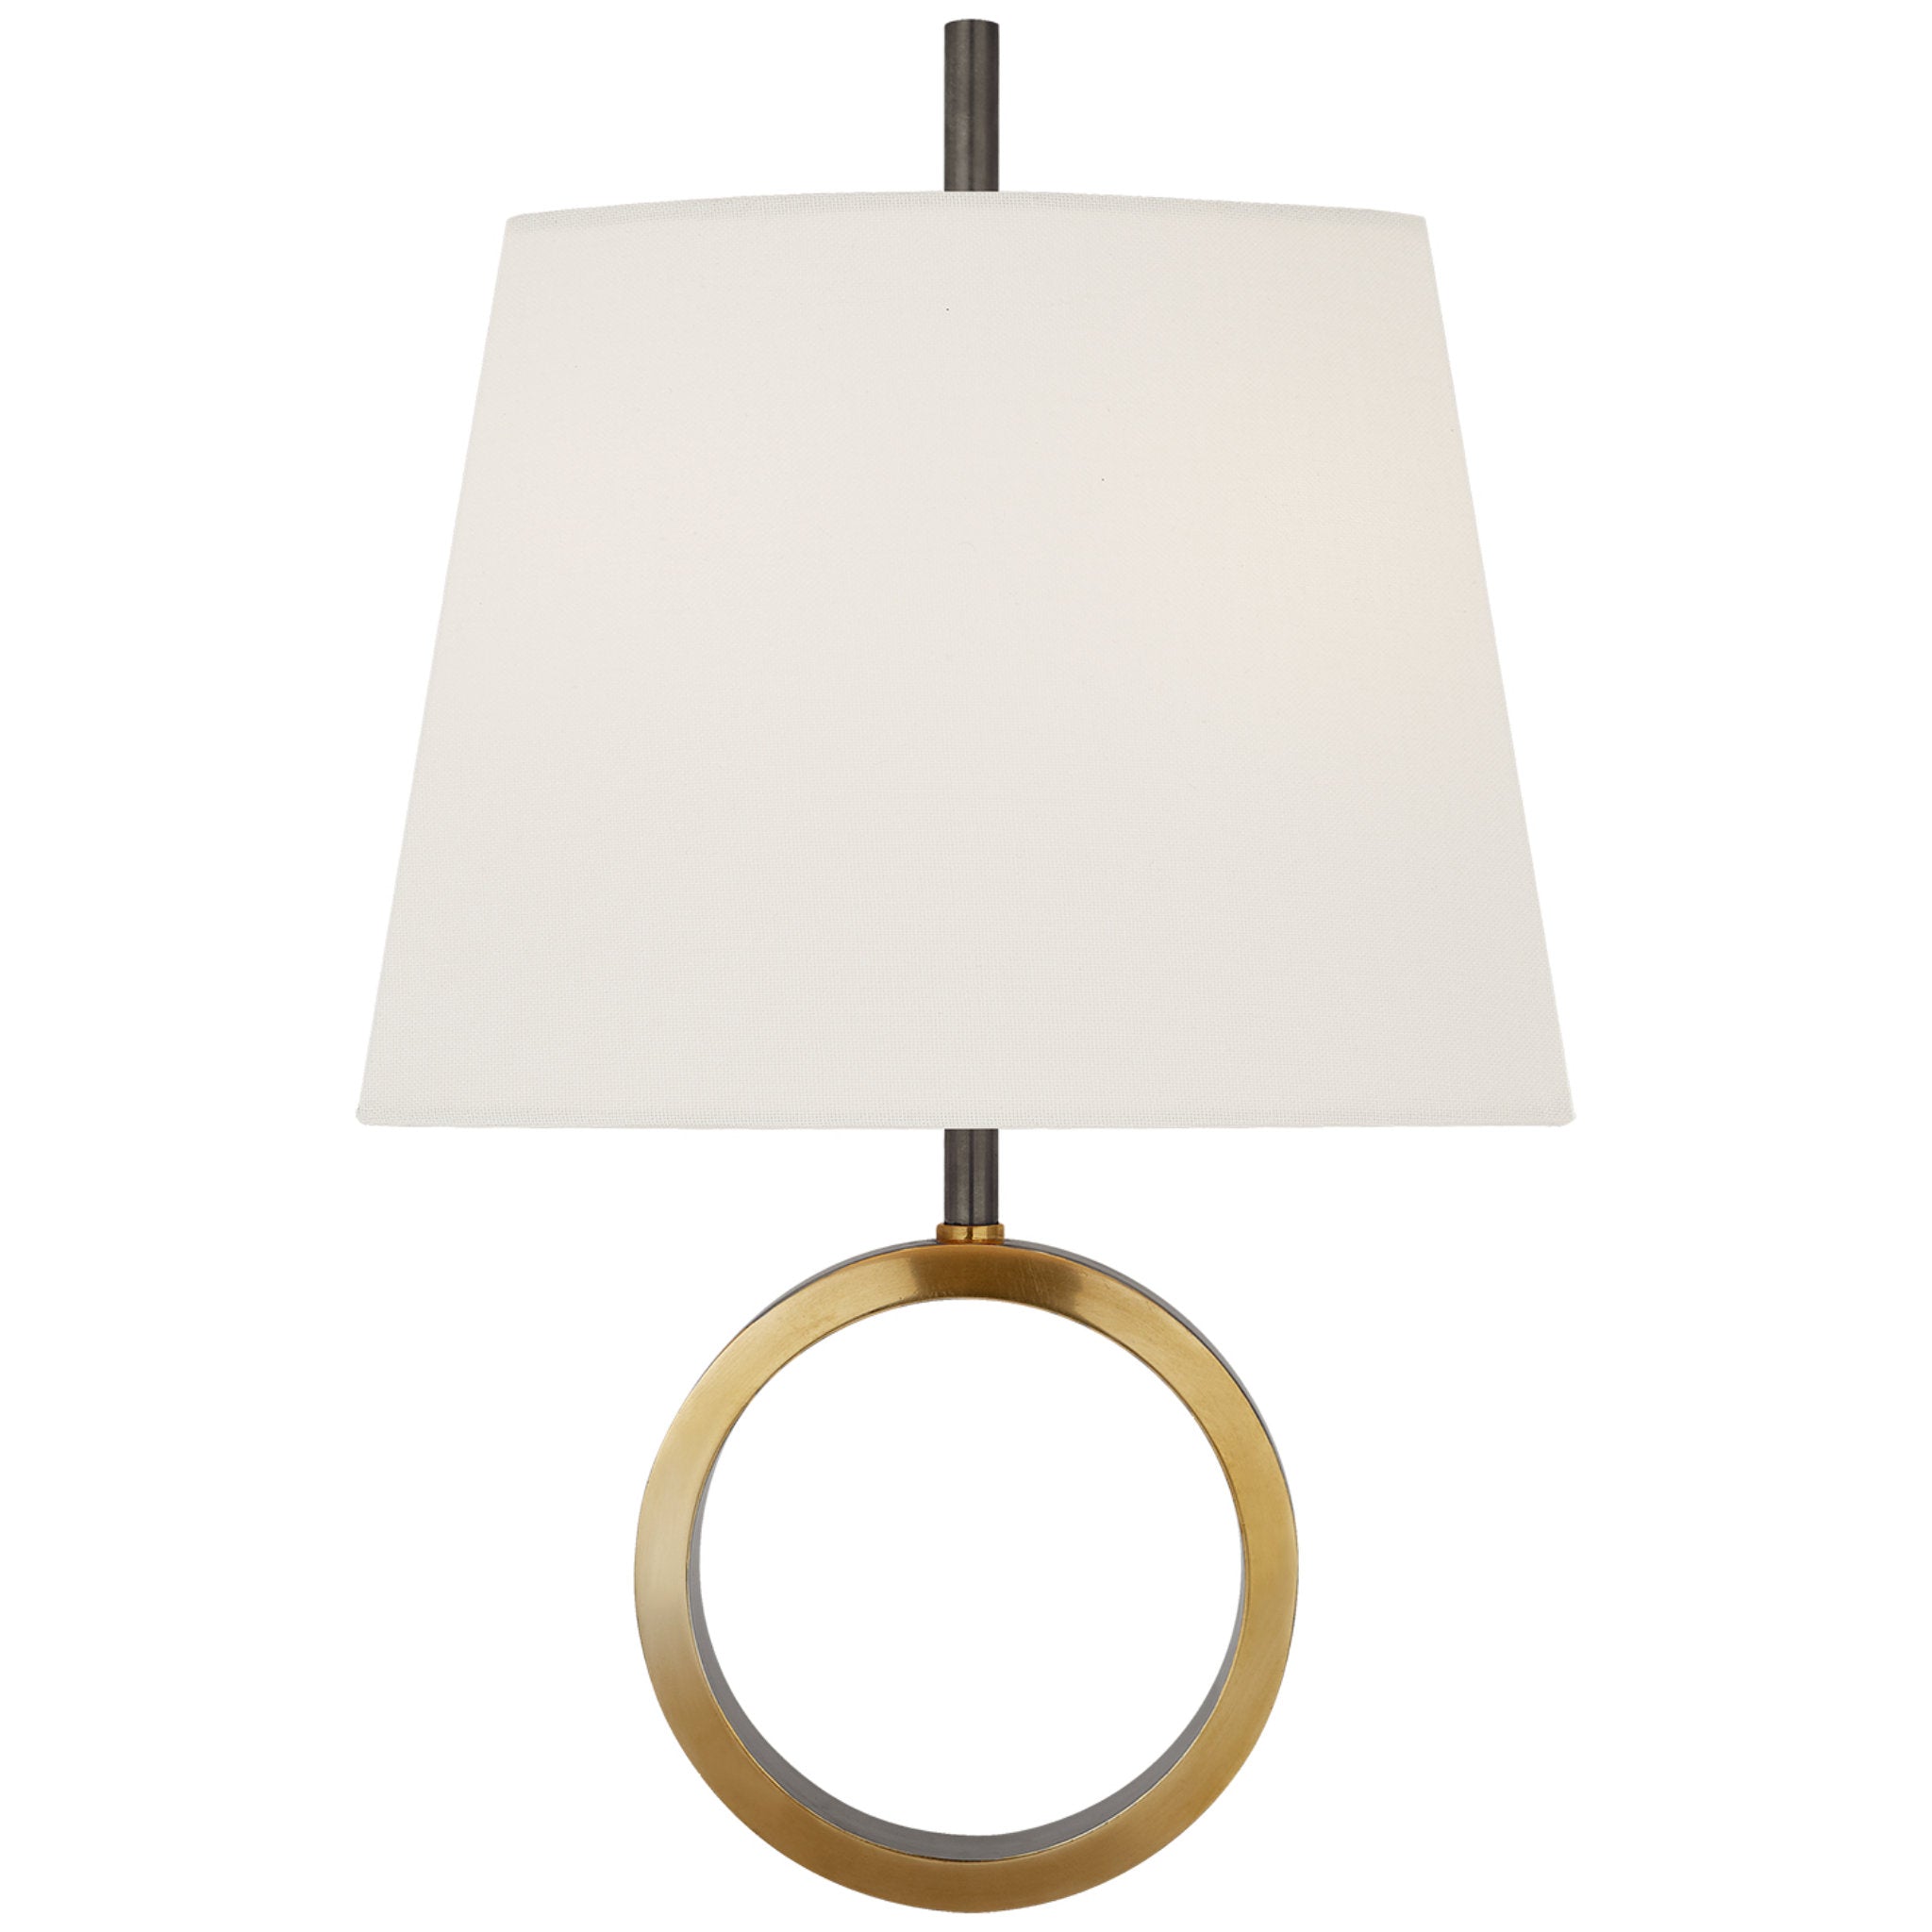 Thomas O'Brien Simone Small Sconce in Bronze and Hand-Rubbed Antique Brass with Linen Shade